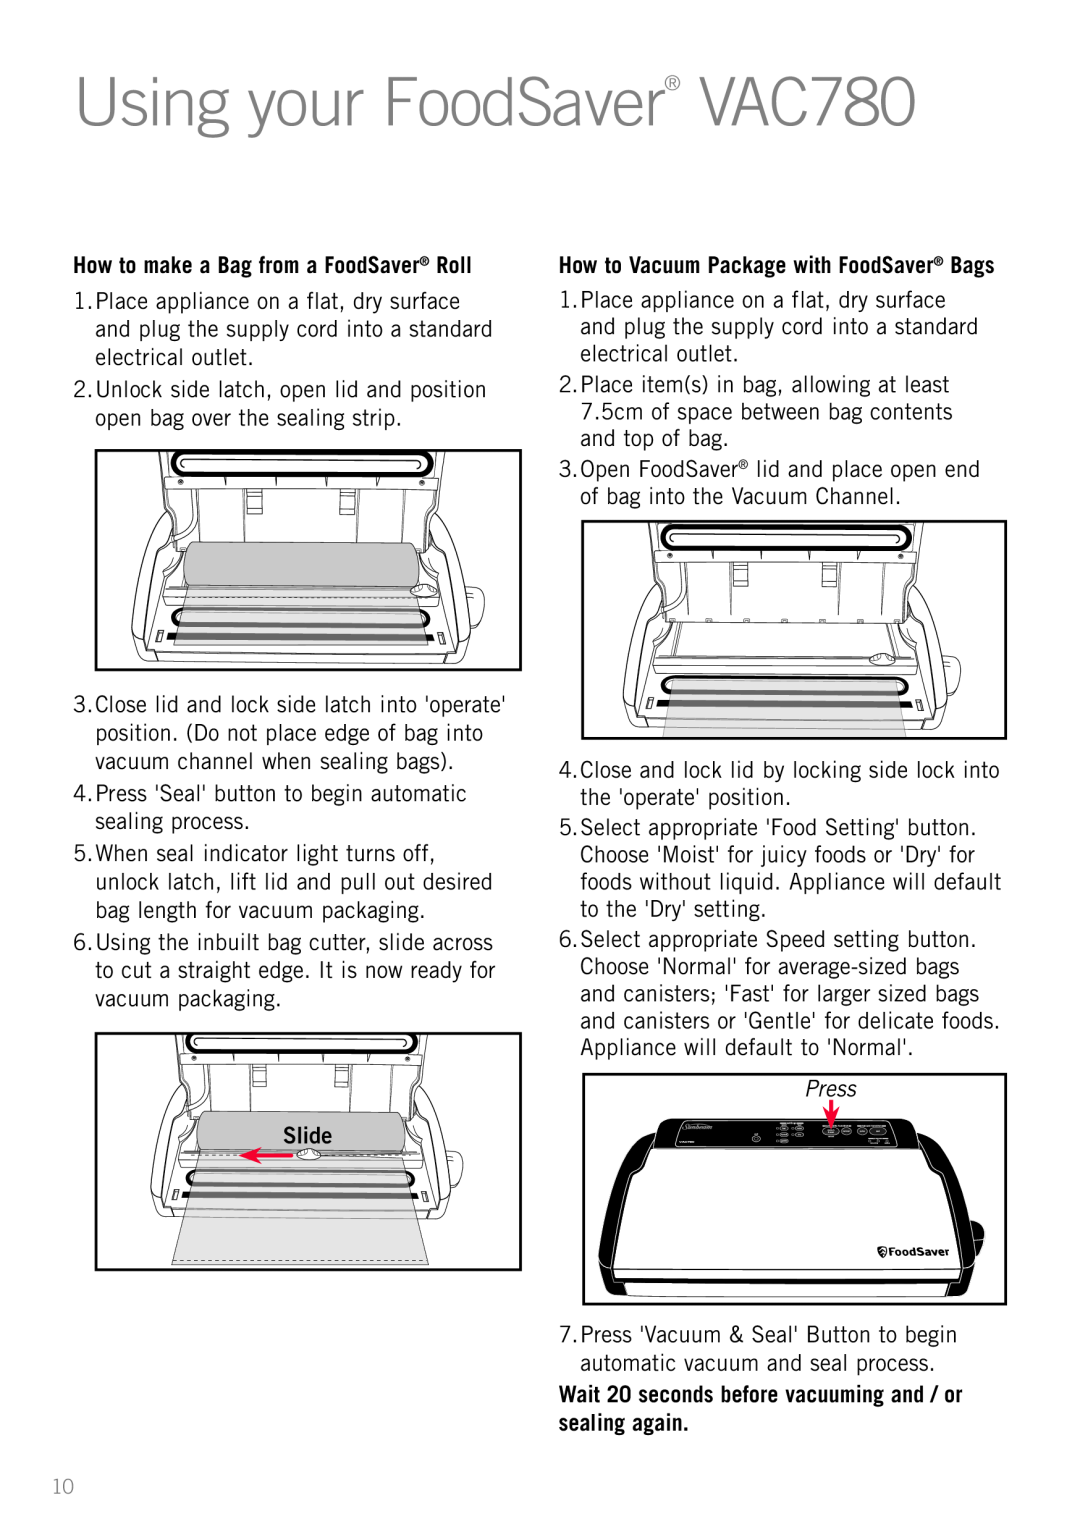 Sunbeam VS7800 manual Using your FoodSaver VAC780, How to make a Bag from a FoodSaver Roll, Slide, Press 